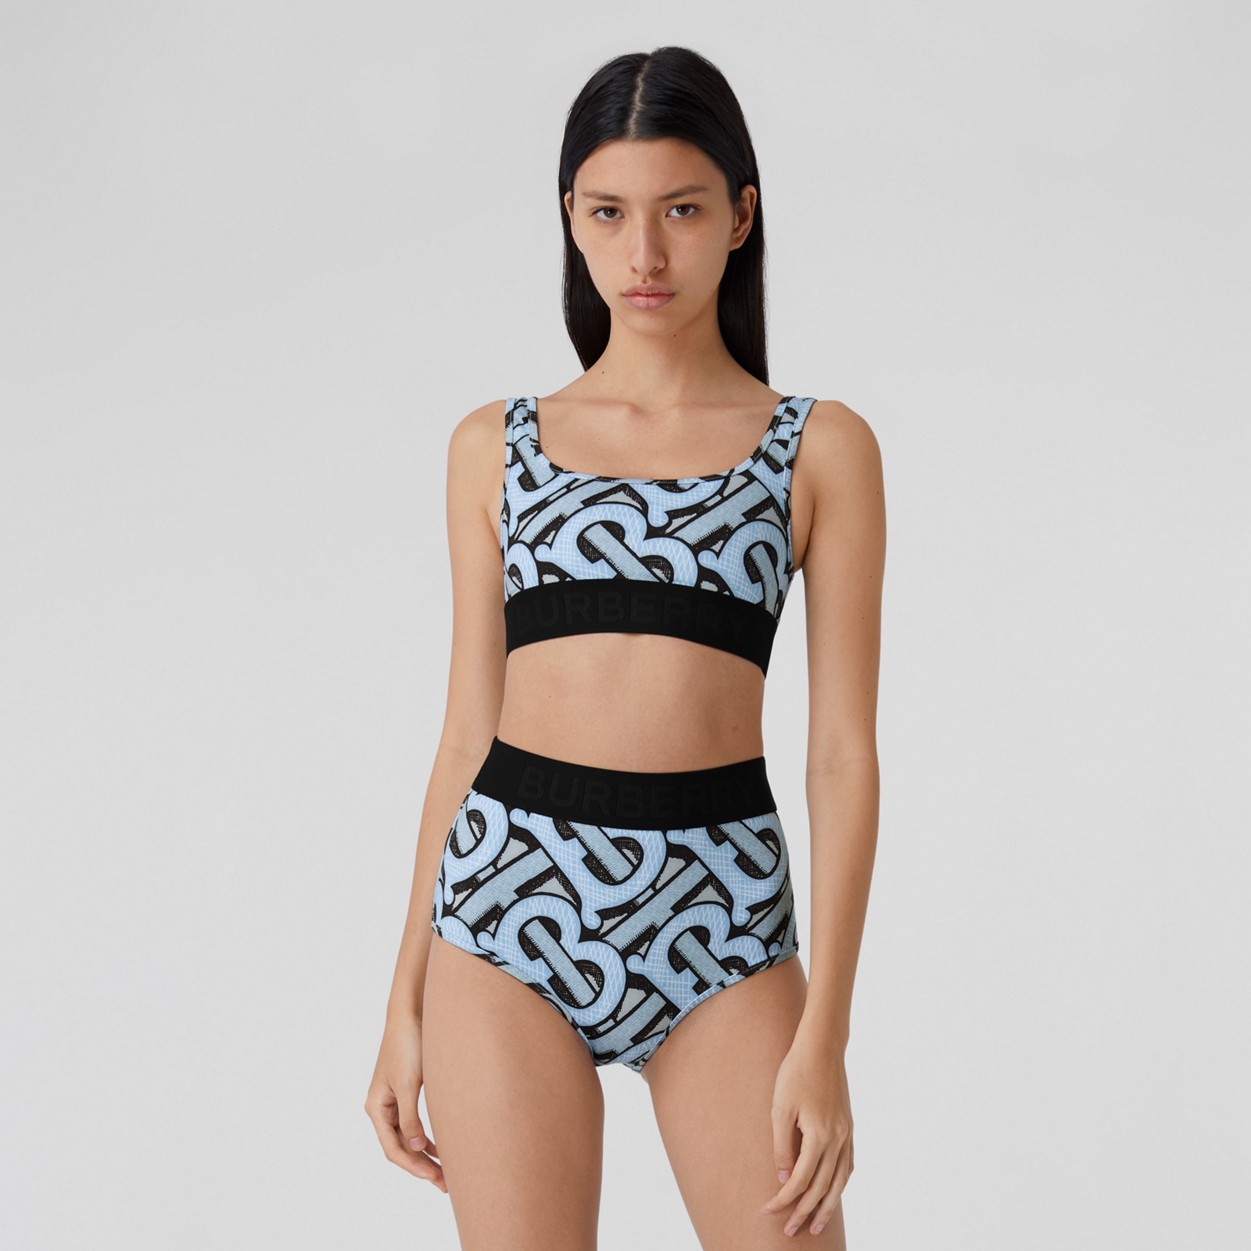 Monogram Print Bikini by Burberry, available on burberry.com for EUR450 Kendall Jenner Top SIMILAR PRODUCT